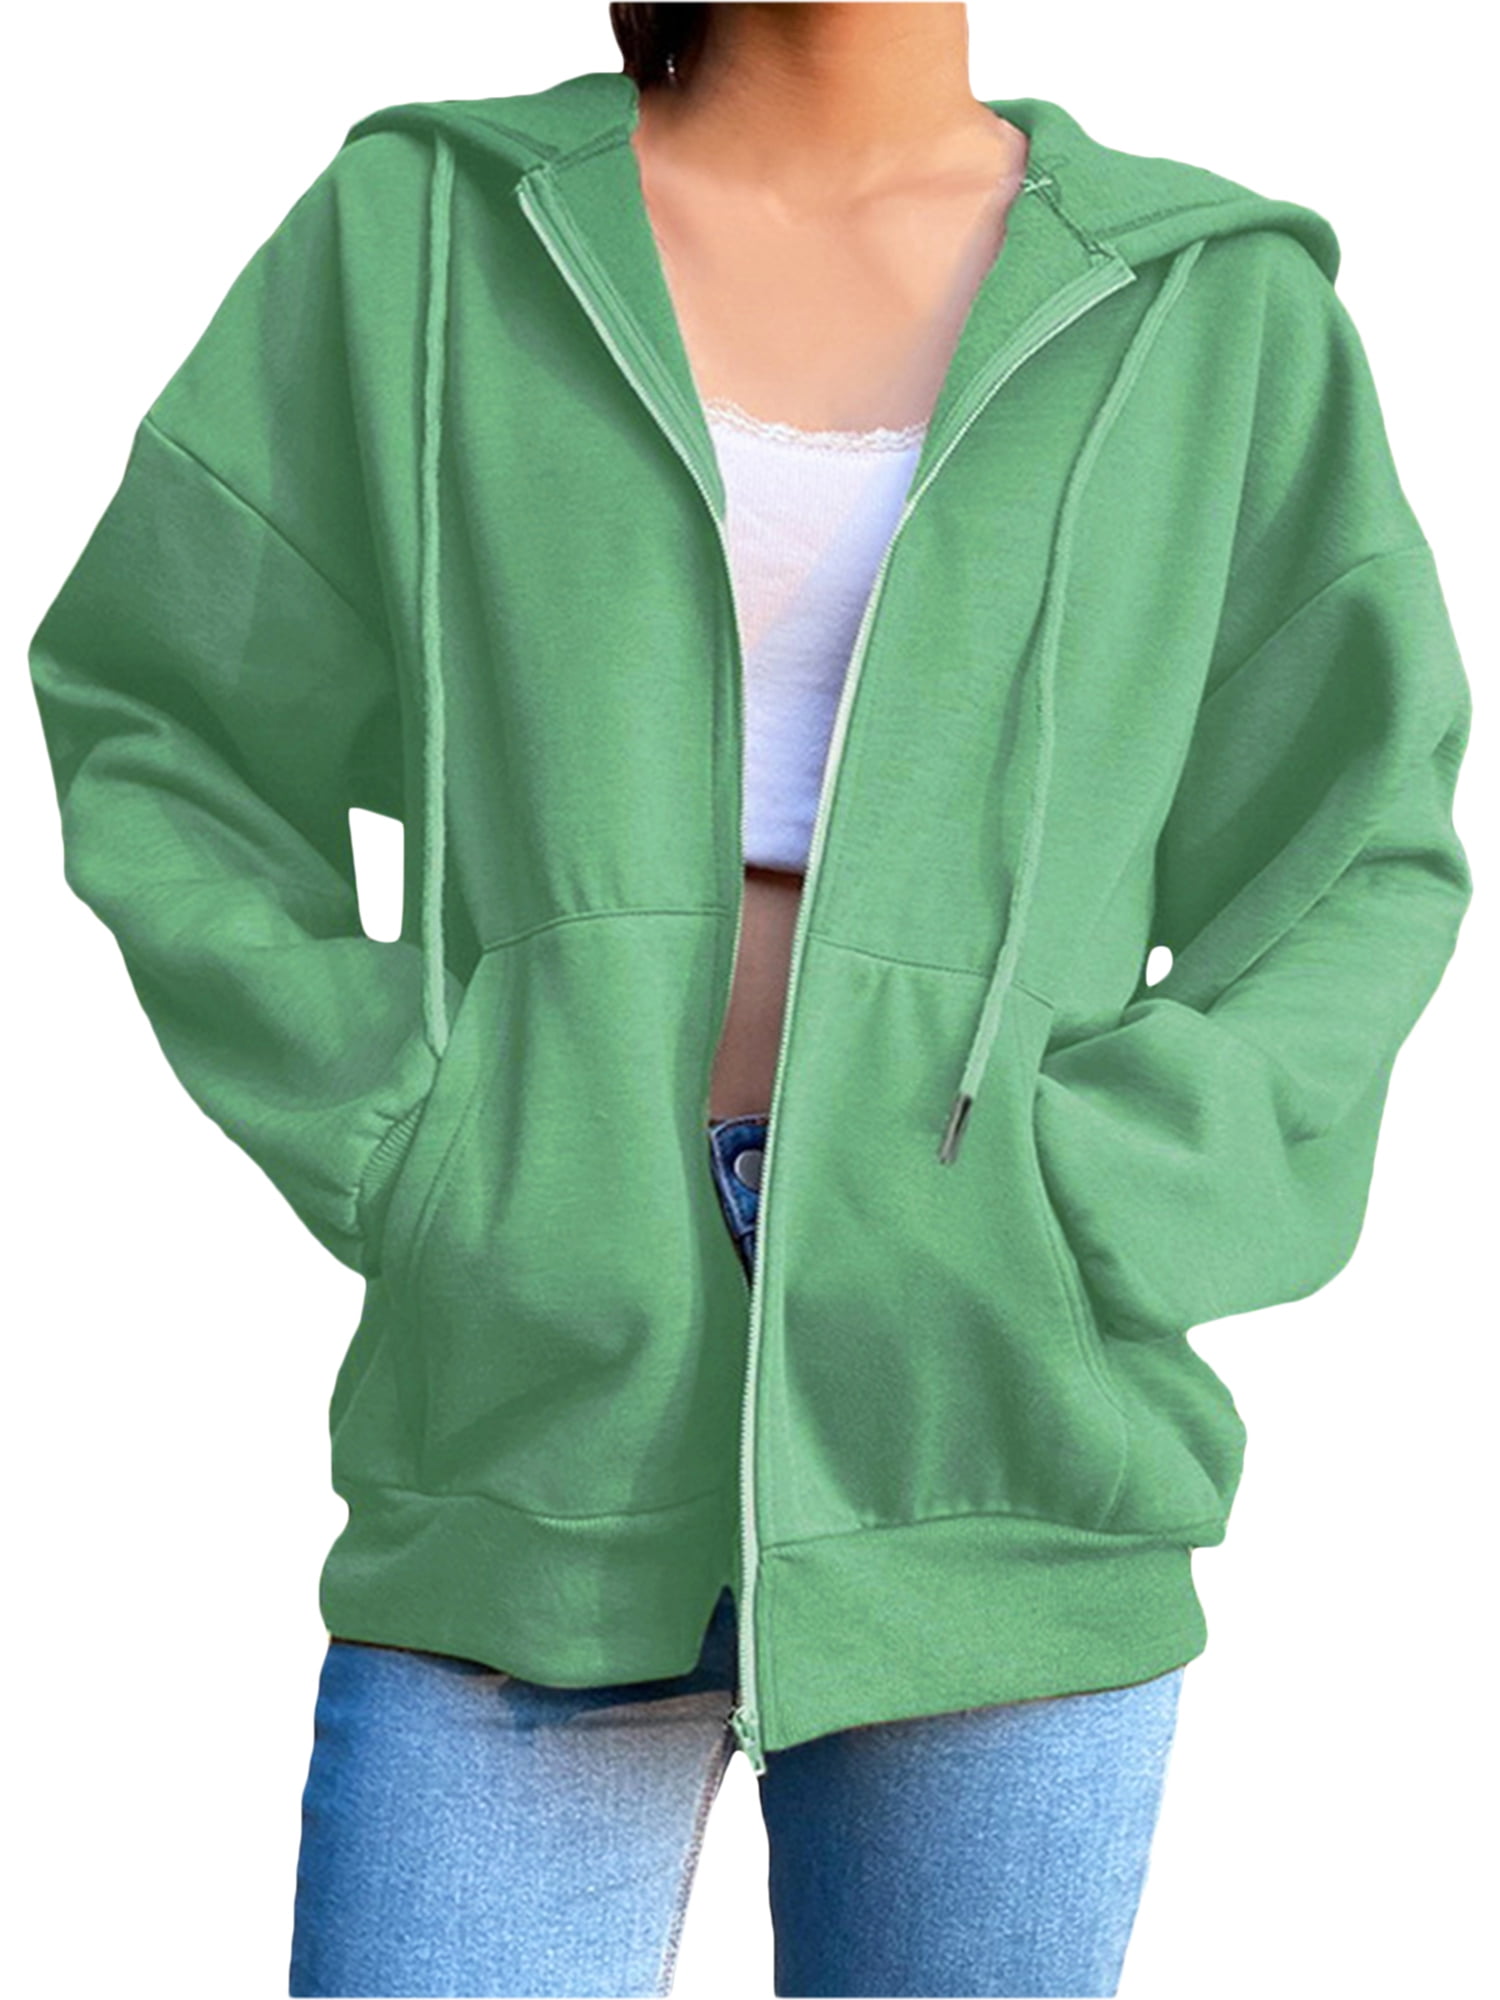 Cethrio Fabric Zip Up Y2K Hoodies for Women Long Sleeve Fall Sweatshirts  Oversized Casual Sweater Coats Jacket with Pocket Army Green at   Women's Clothing store